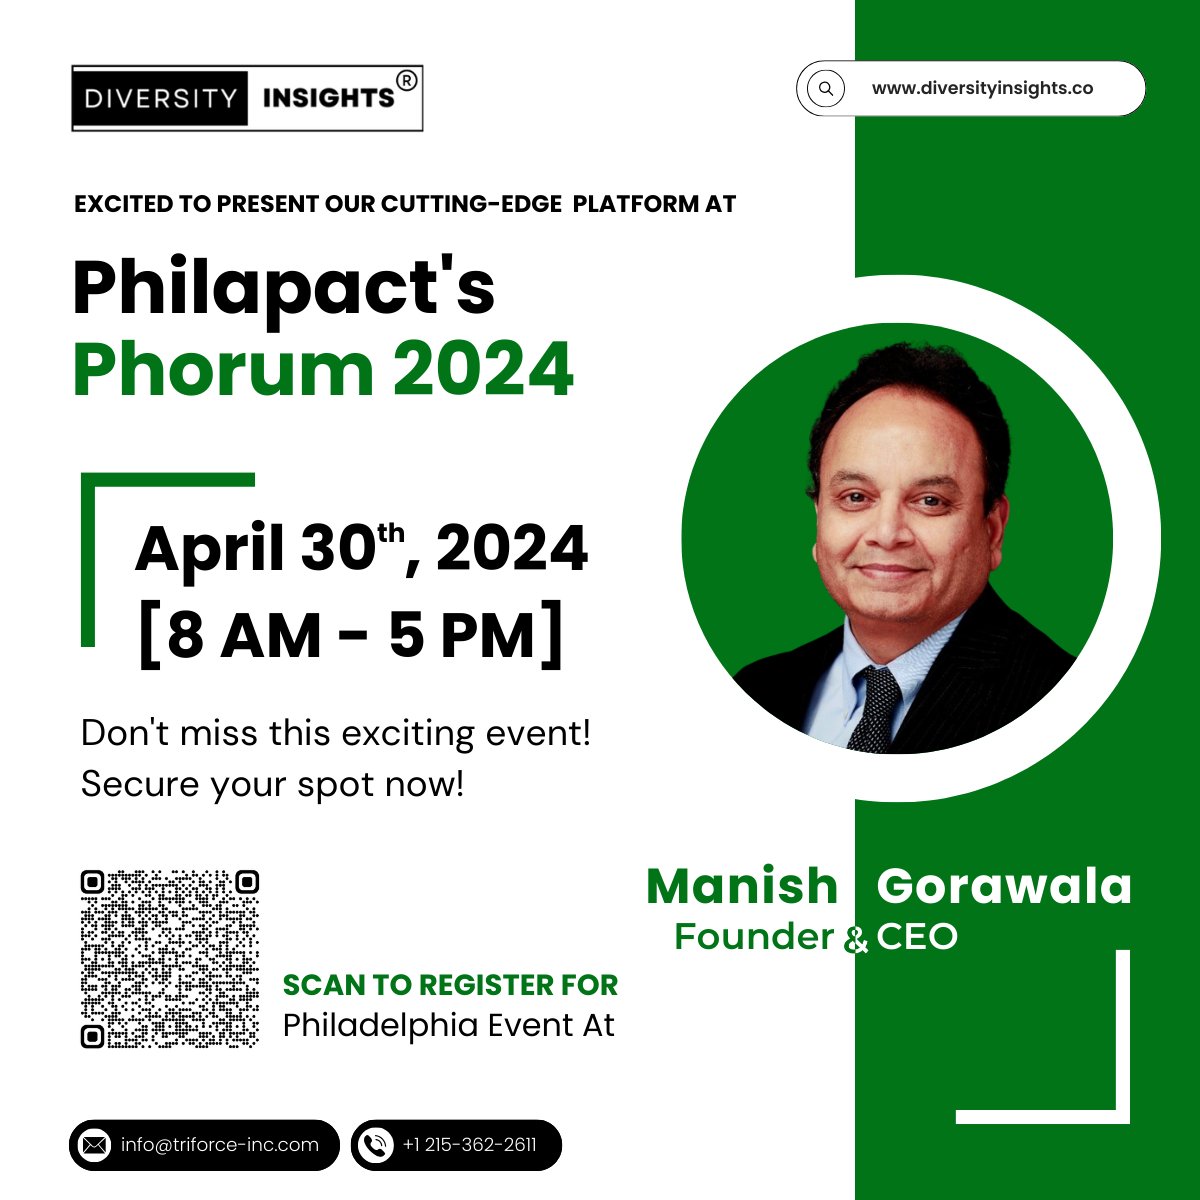 Excited for #Phorum2024? Join me, Manish Gorawala, CEO of Tri-Force Consulting Services, at Philadelphia's premier enterprise tech event! 
📅 Date: April 30, 2024
Time: 8:00 AM - 6:00 PM EDT
+1 215-362-2611
📧 info@diversityinsights.co
#TechInPhilly #Innovation   #Phorum2024